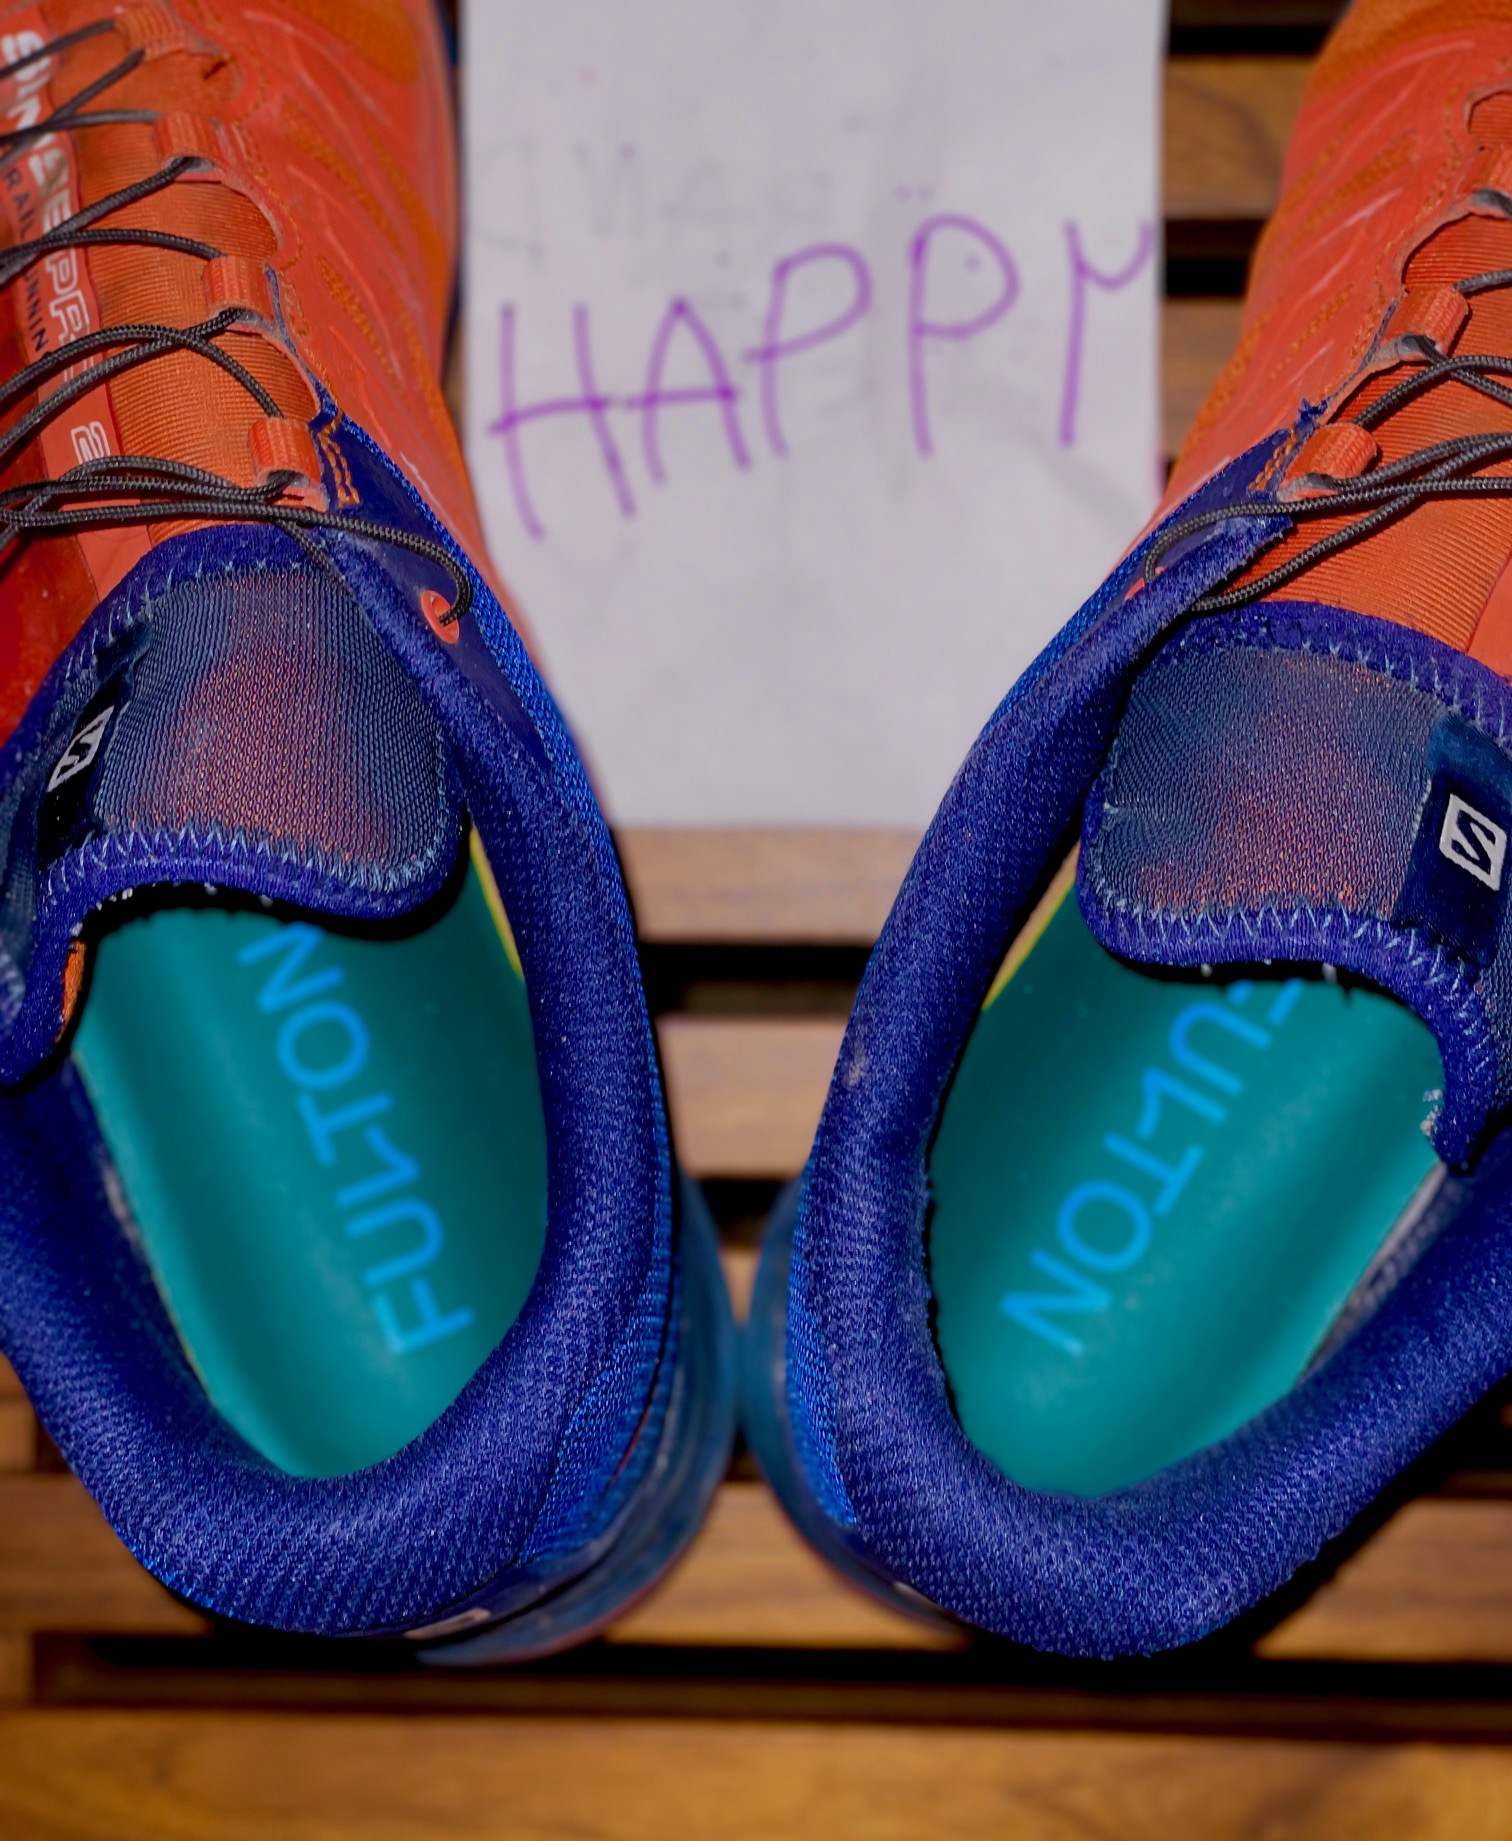 Fulton insoles in shoes with happy sign behind them